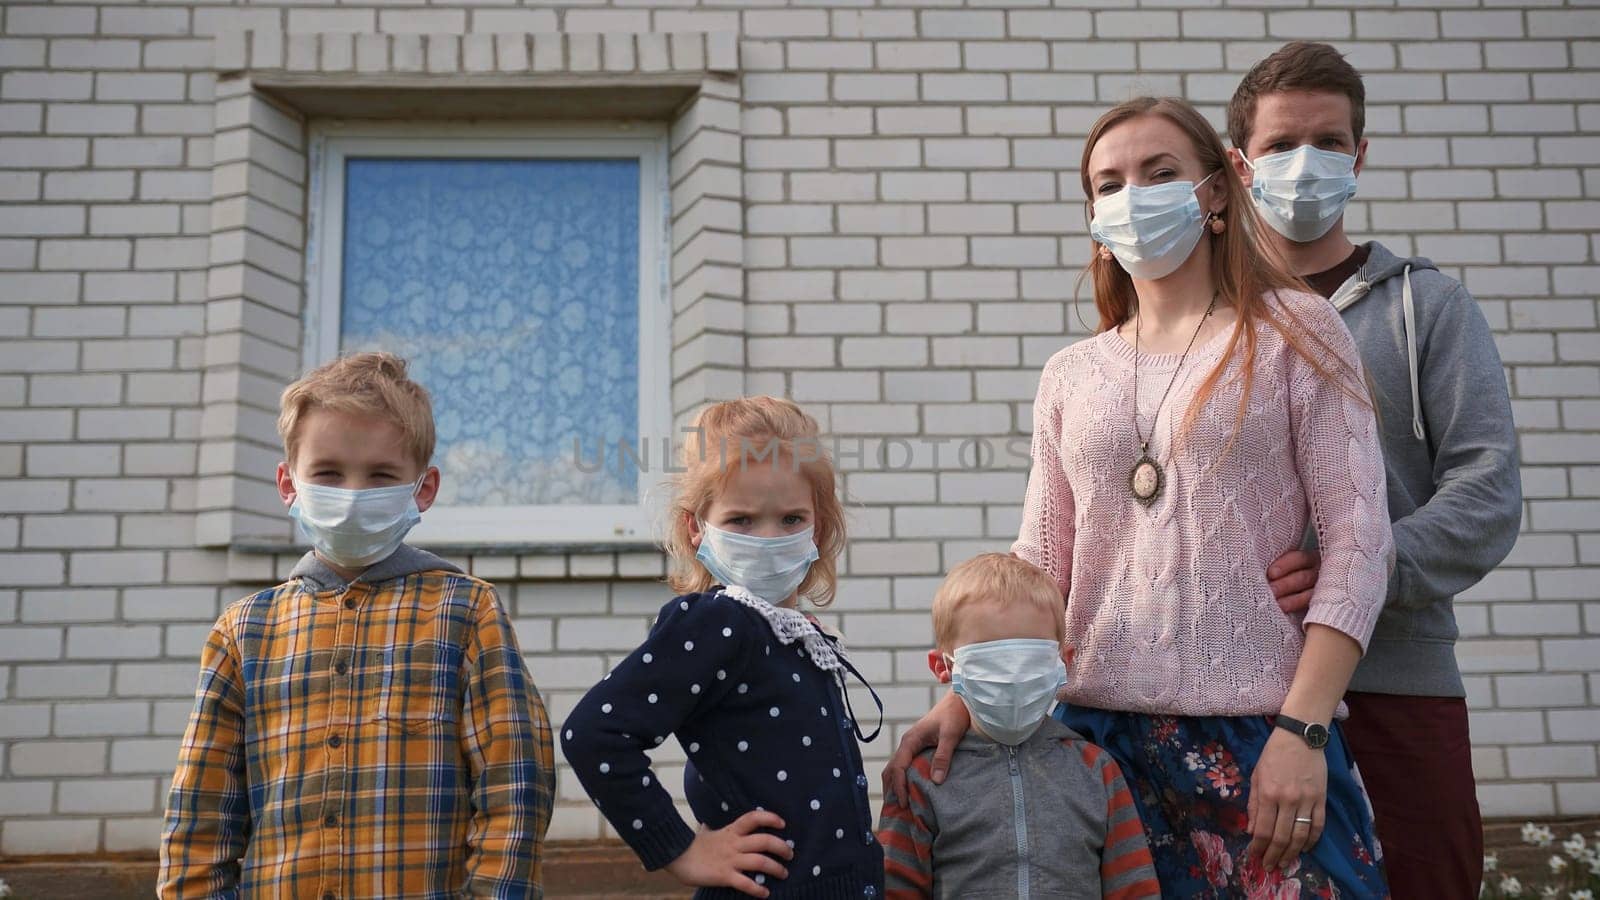 A large family of masks during the coronovirus pandemic. by DovidPro